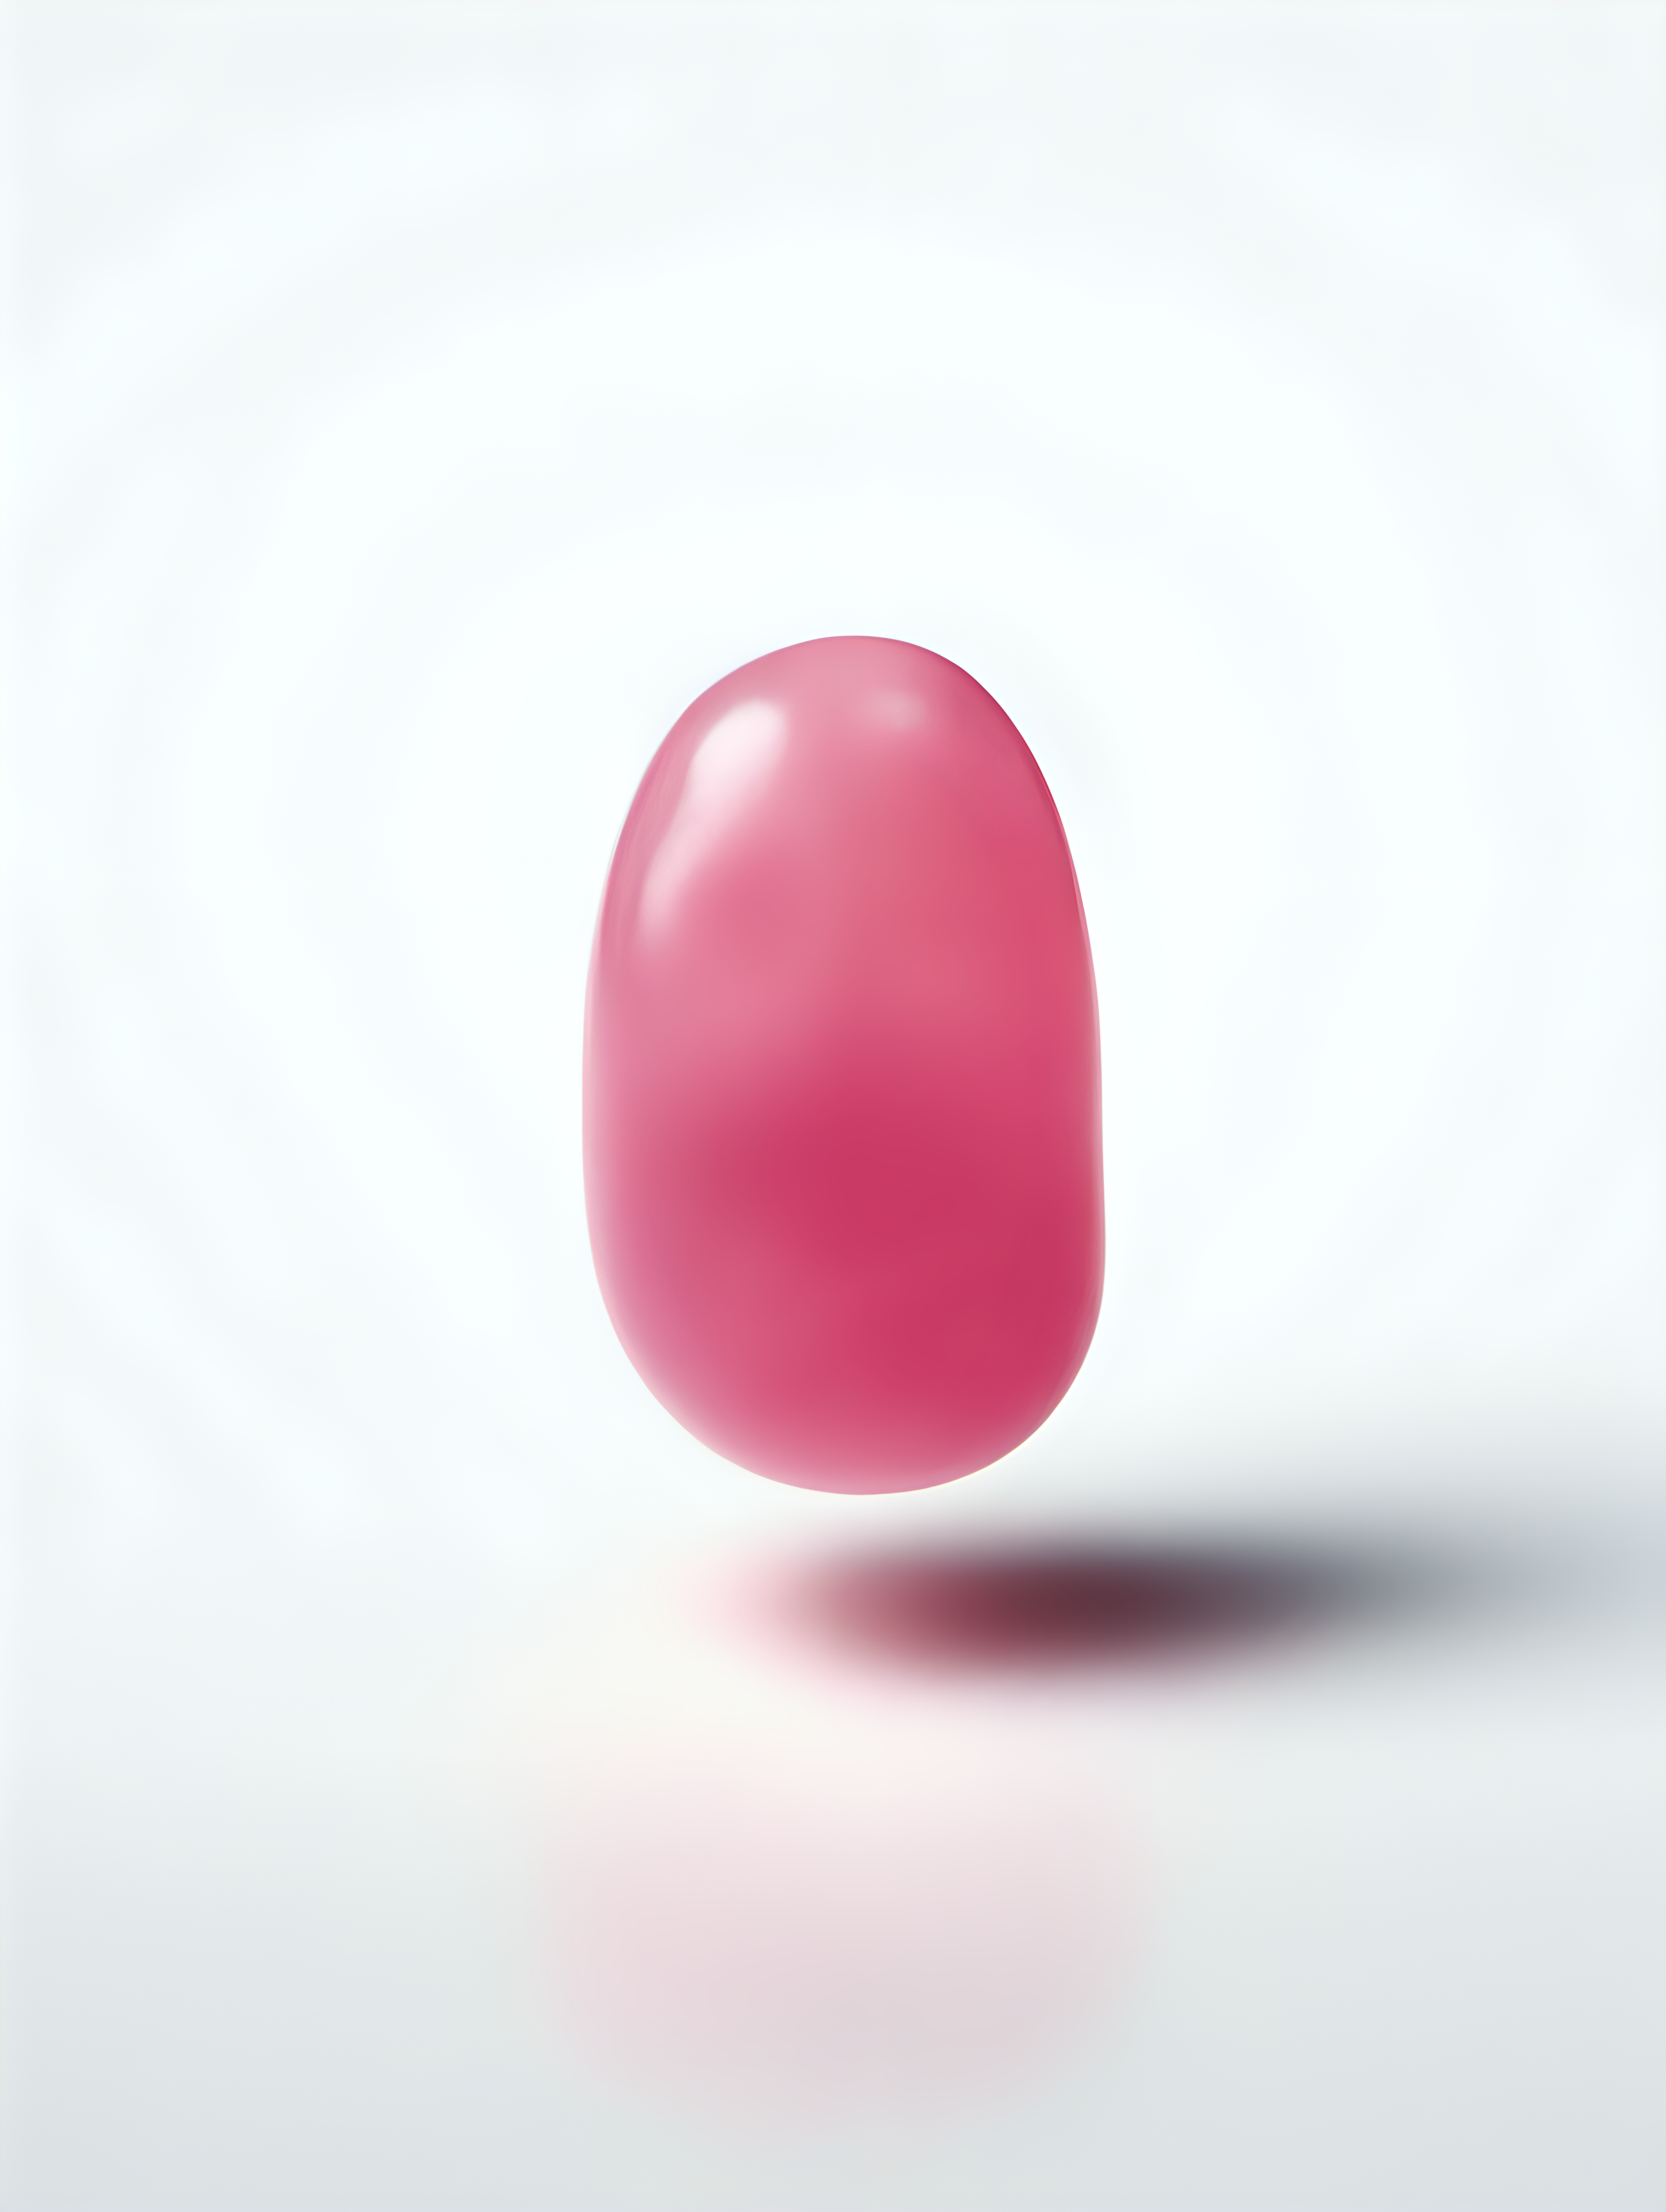 ARTISTIC IMAGE OF A SINGLE PINK JELLYBEAN ON